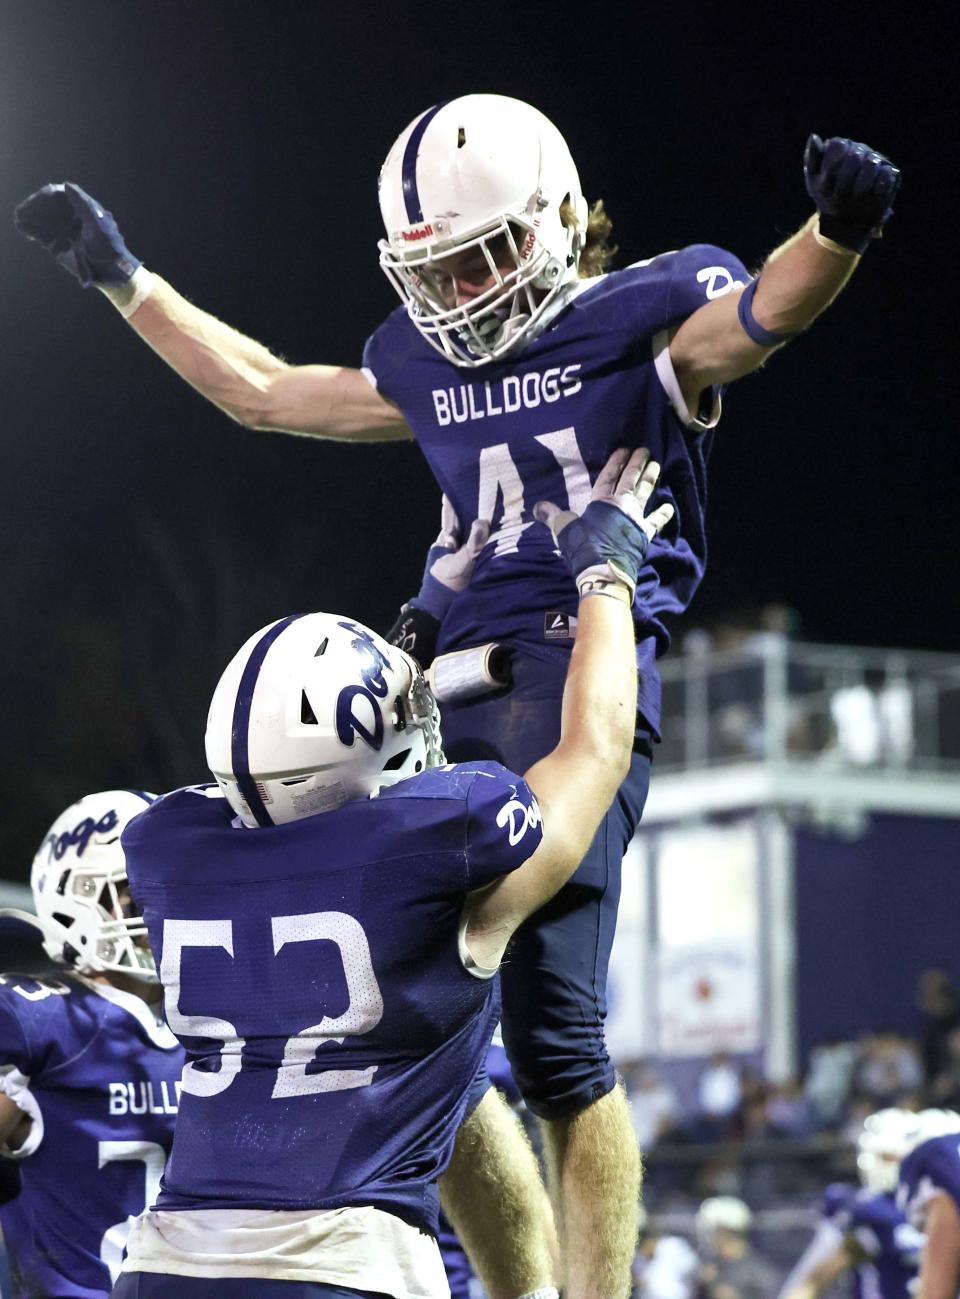 Rockland running back Jacob Coulstring carries the football for a touchdown and is hoisted into the air by Leary Costa during a game versus Seekonk on Friday, Nov. 4, 2022.